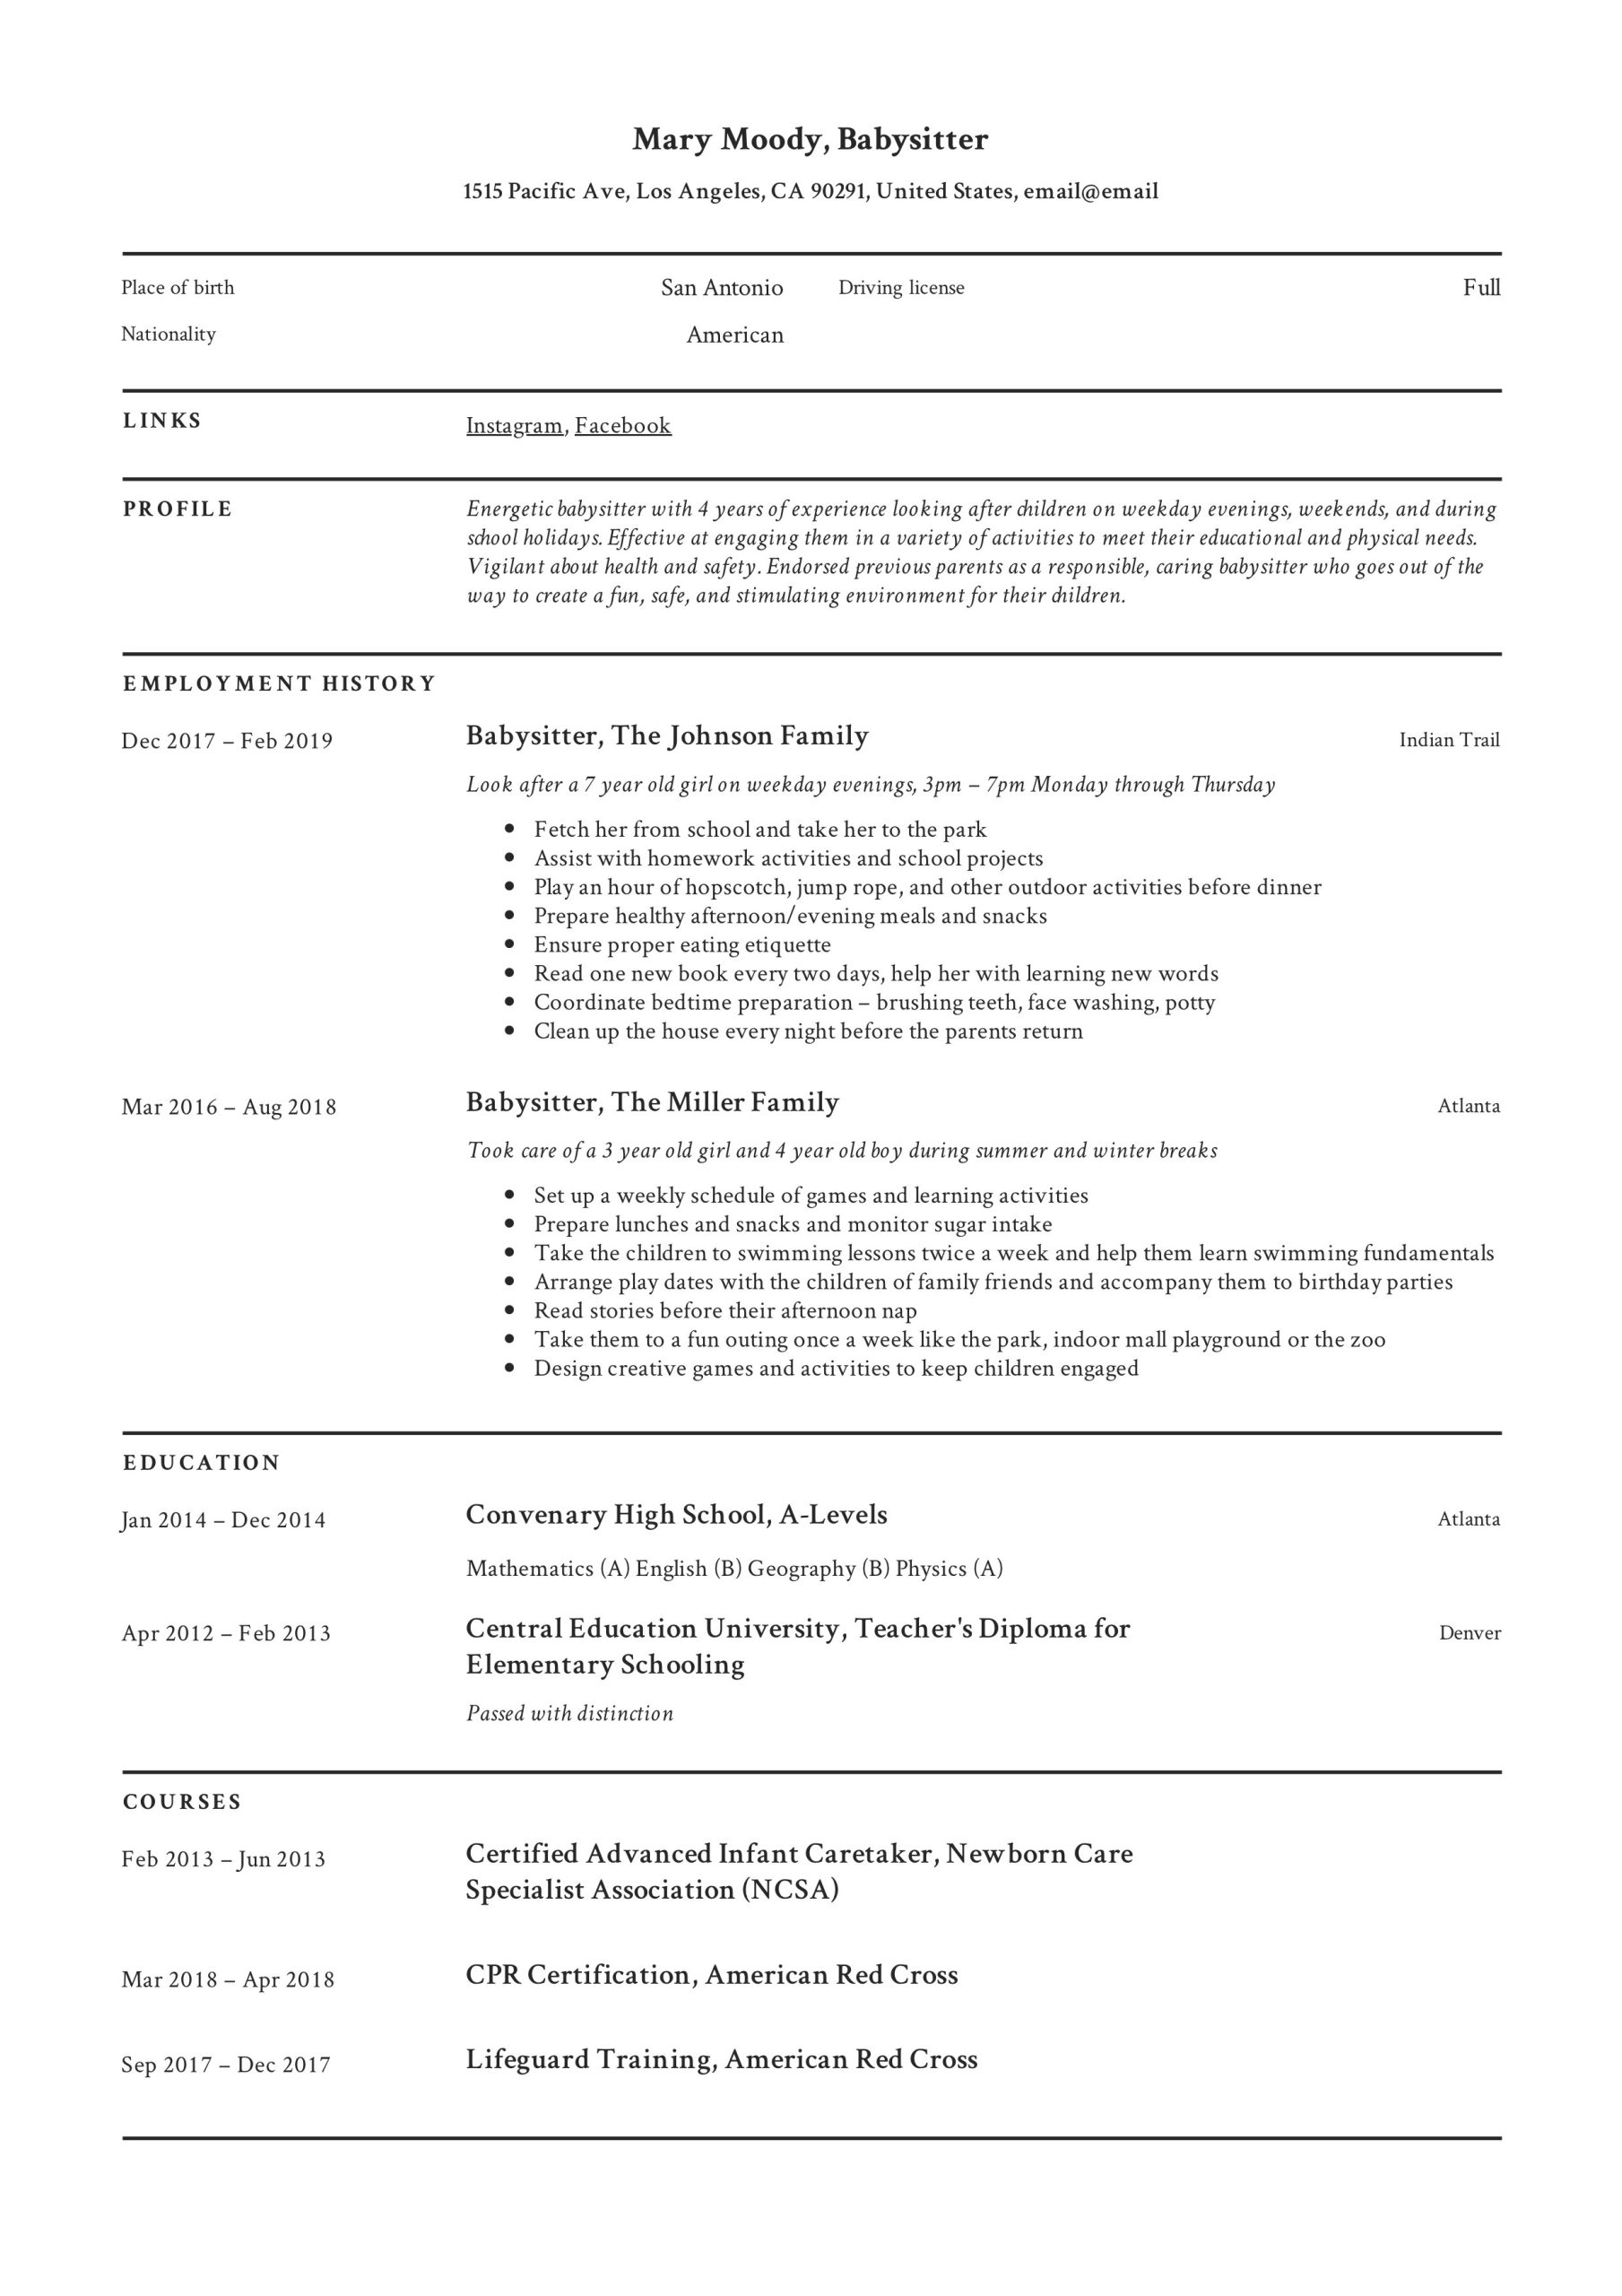 Sample Resume for Newborn Care Specialists 19 Babysitter Resume Examples & Writing Guide 2022